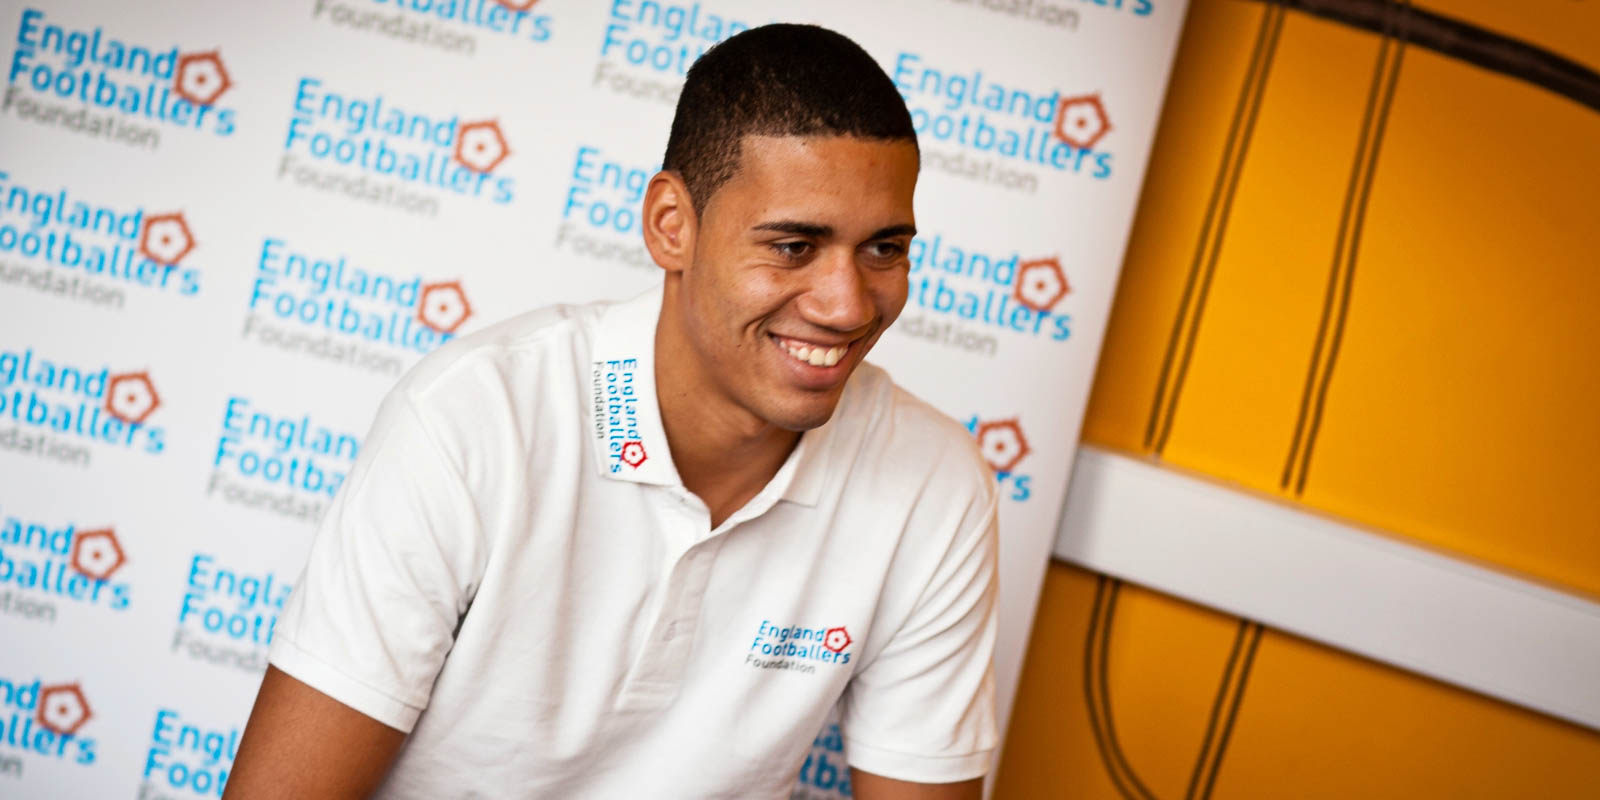 Chris Smalling PR Shoot factory youth zone Manchester • Neilson Reeves Photography1600 x 800